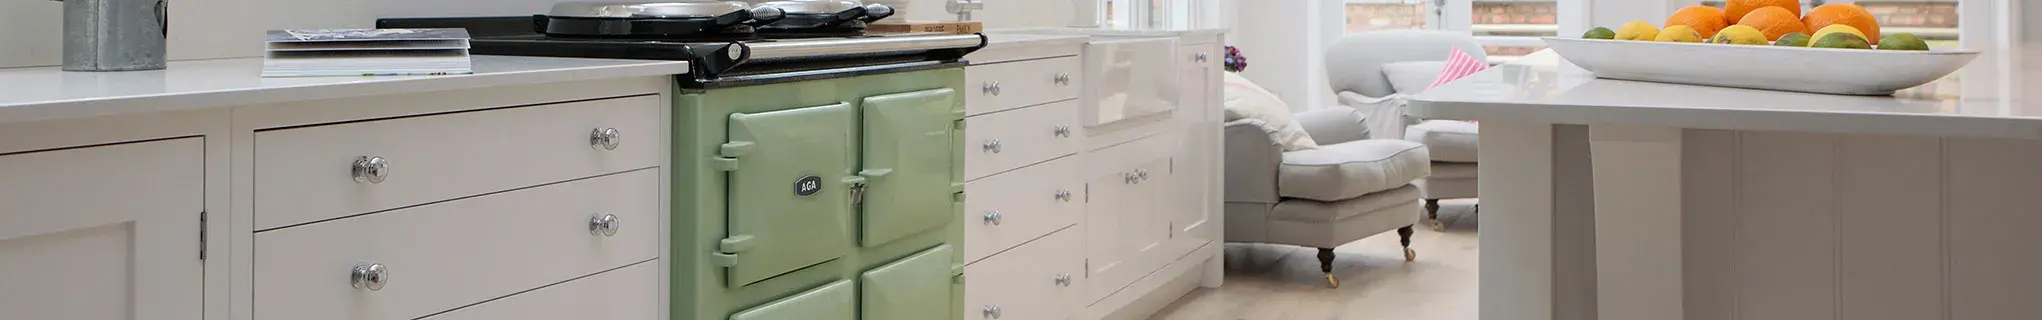 AGA 7 Series cooker in Olivine with White cabinets